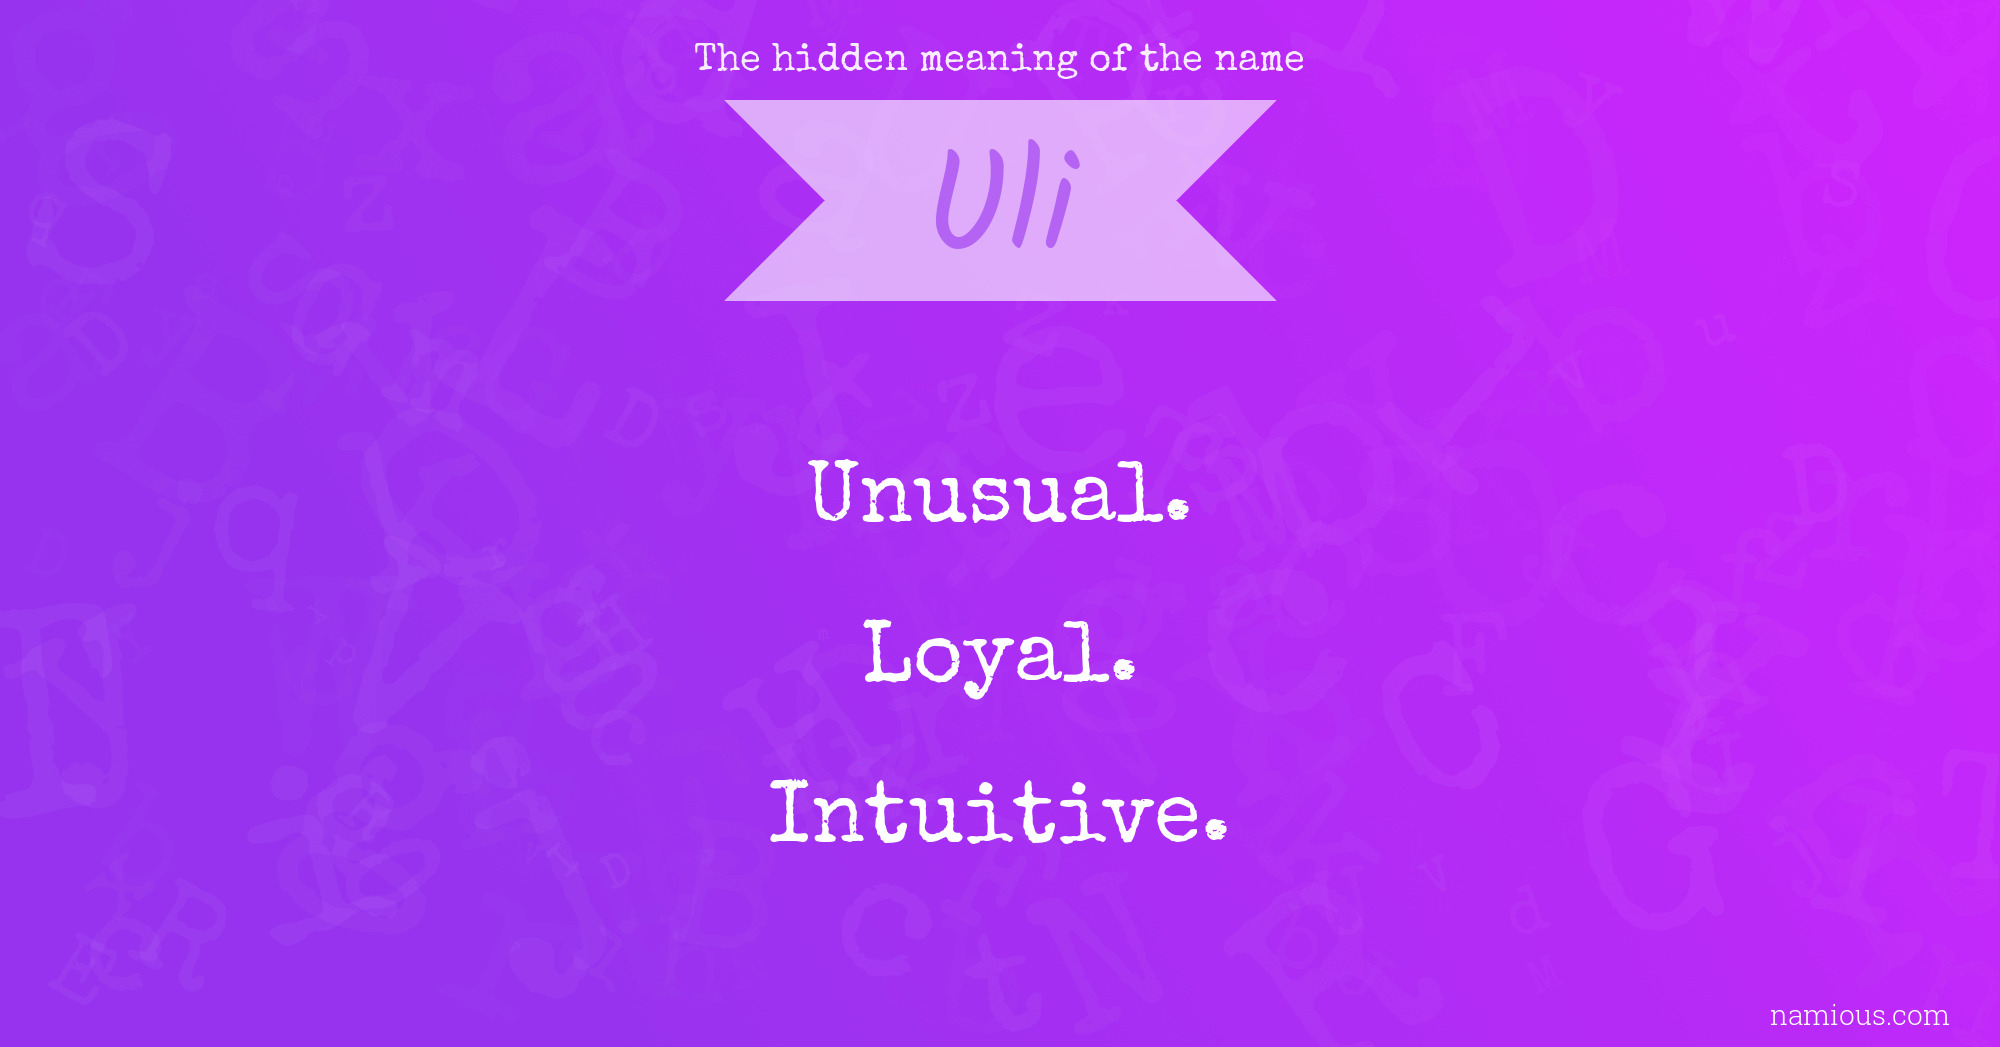 The hidden meaning of the name Uli